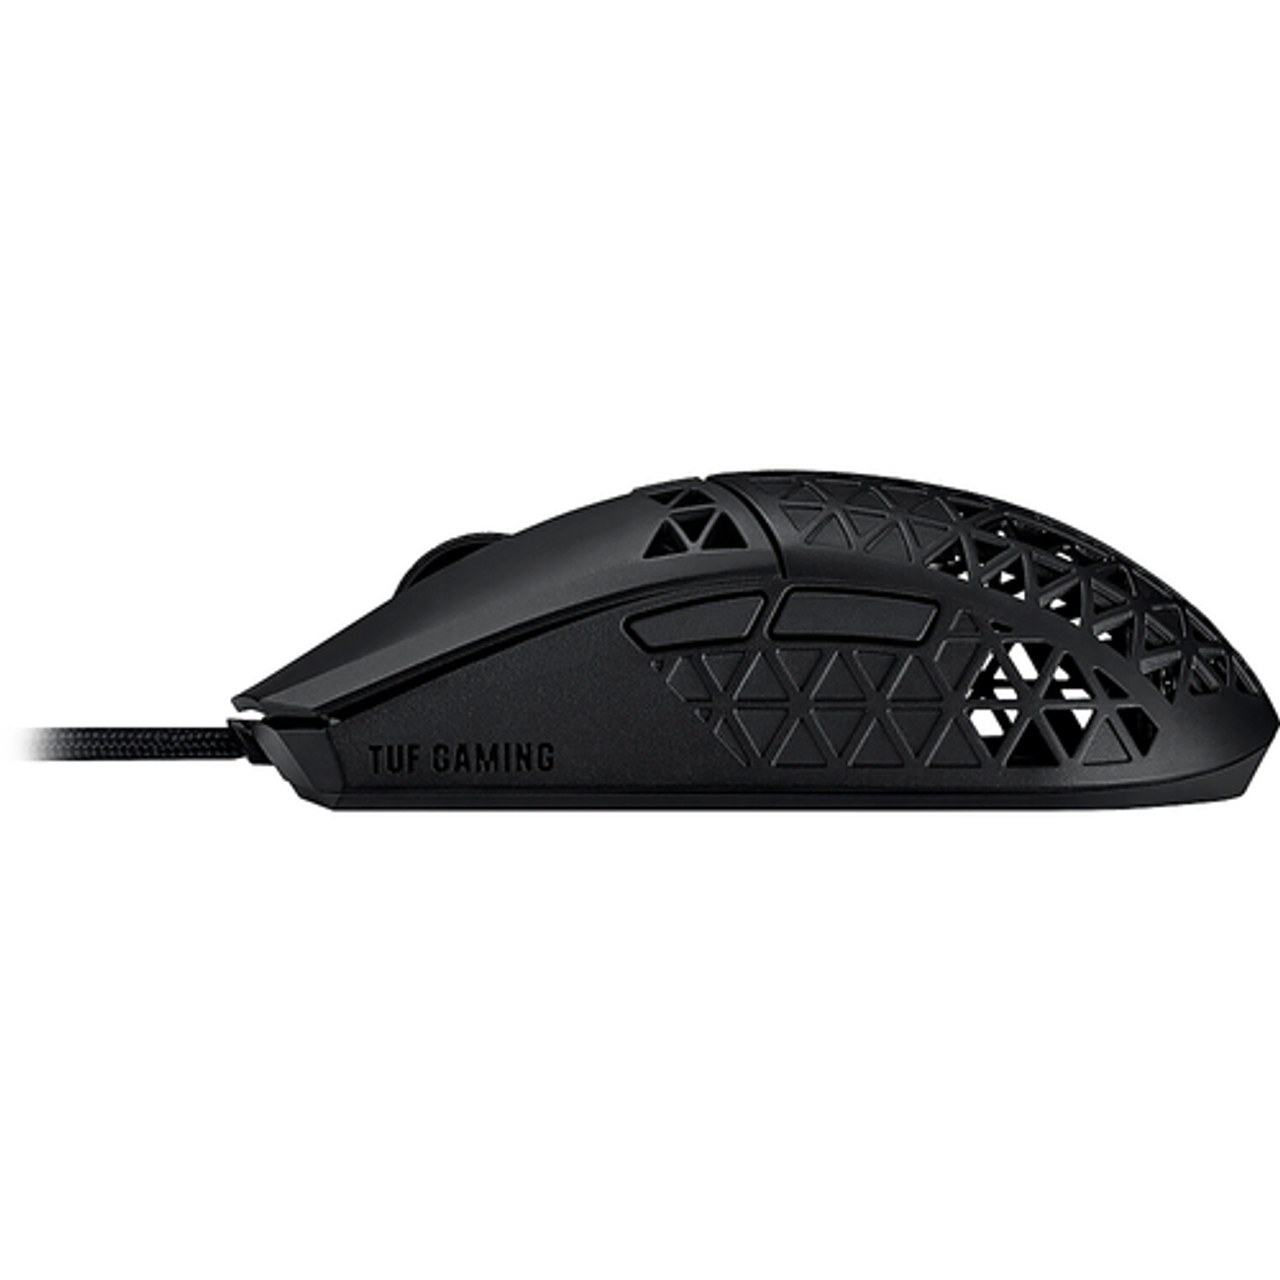 ASUS - TUF Gaming M4 Air Wired Optical, Scroll 6 Button, Water Resistant Gaming Mouse *ASUS Antibacterial Guard protection